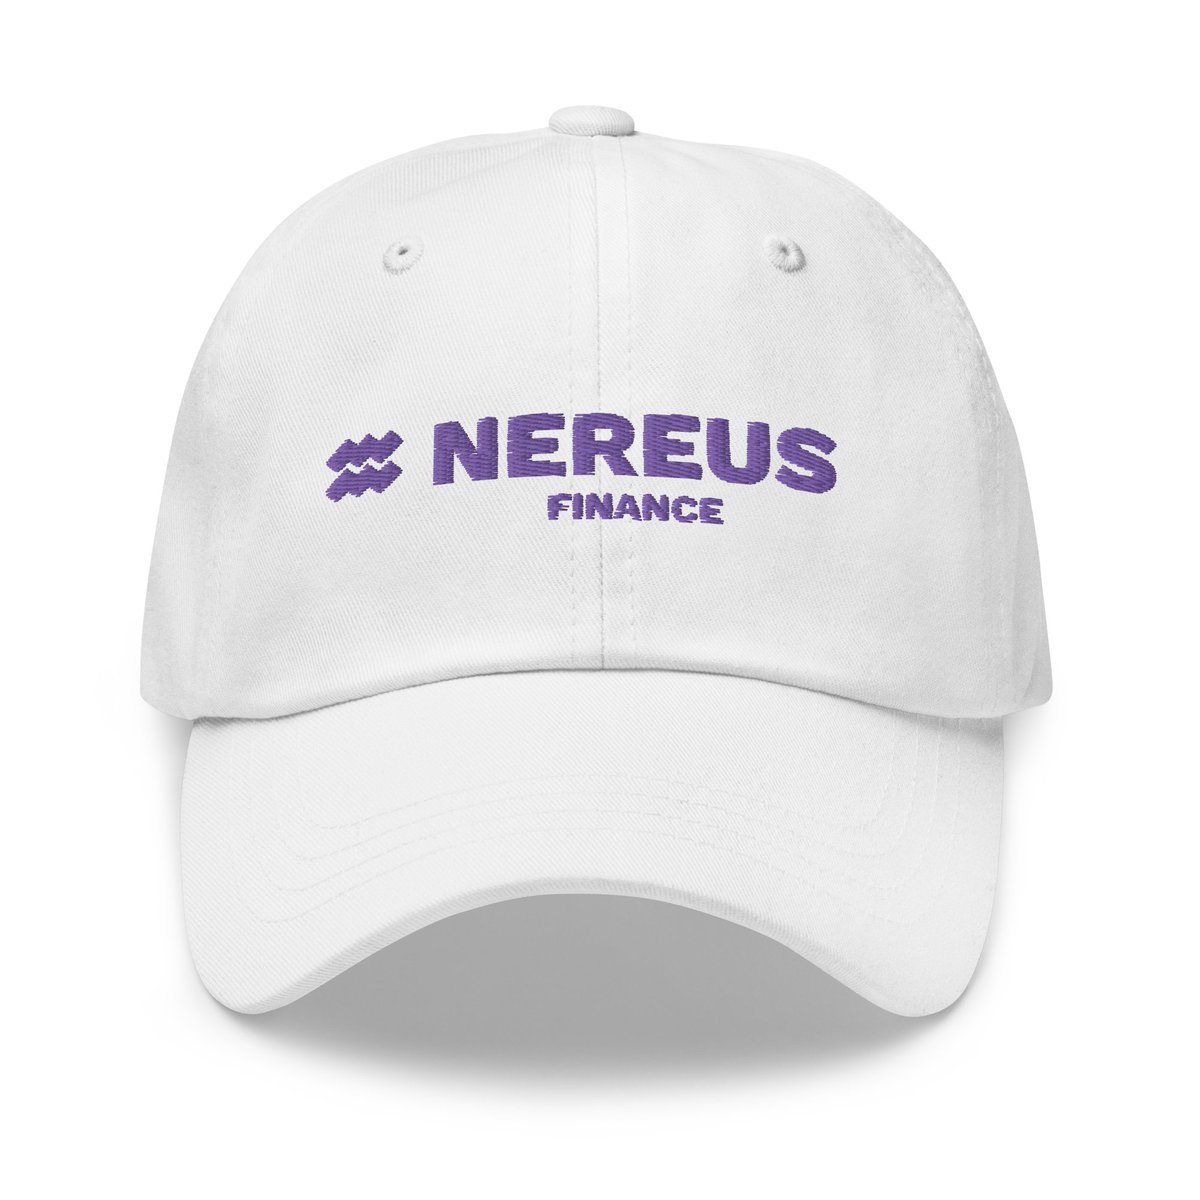 📢📢📢 Look at our fantastic Merch and be one of the many who wear Nereus Finance Merch! :) Two shops to lower the expanse and have faster delivery! 🎯🎯🎯 1⃣ US/Oceania Merch: nereus-finance.myspreadshop.com 2⃣ Europe Merch: nereus-finance.myspreadshop.net